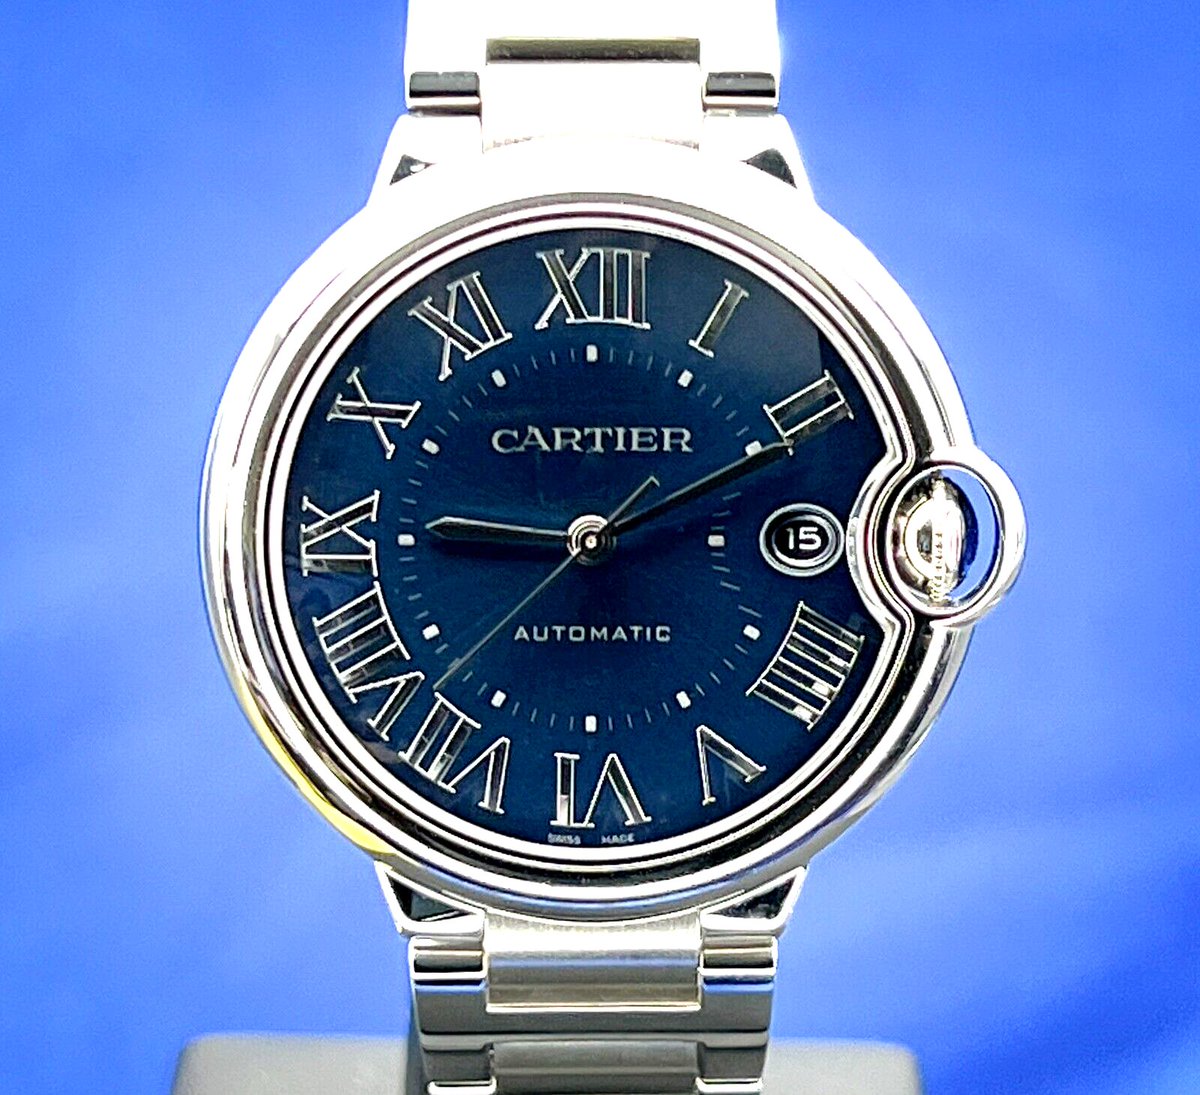 New Cartier Ballon Bleu Stainless Steel Automatic 40 mm Blue Dial Watch WSBB0061

For sale by @adrenaline_timepieces

$6,249

#cartier #watches #valueyourwatch #watchmarketplace #luxury #luxurylife #entrereneur #luxurywatch #luxurywatches #luxurydesign #businesswatch #watchfam